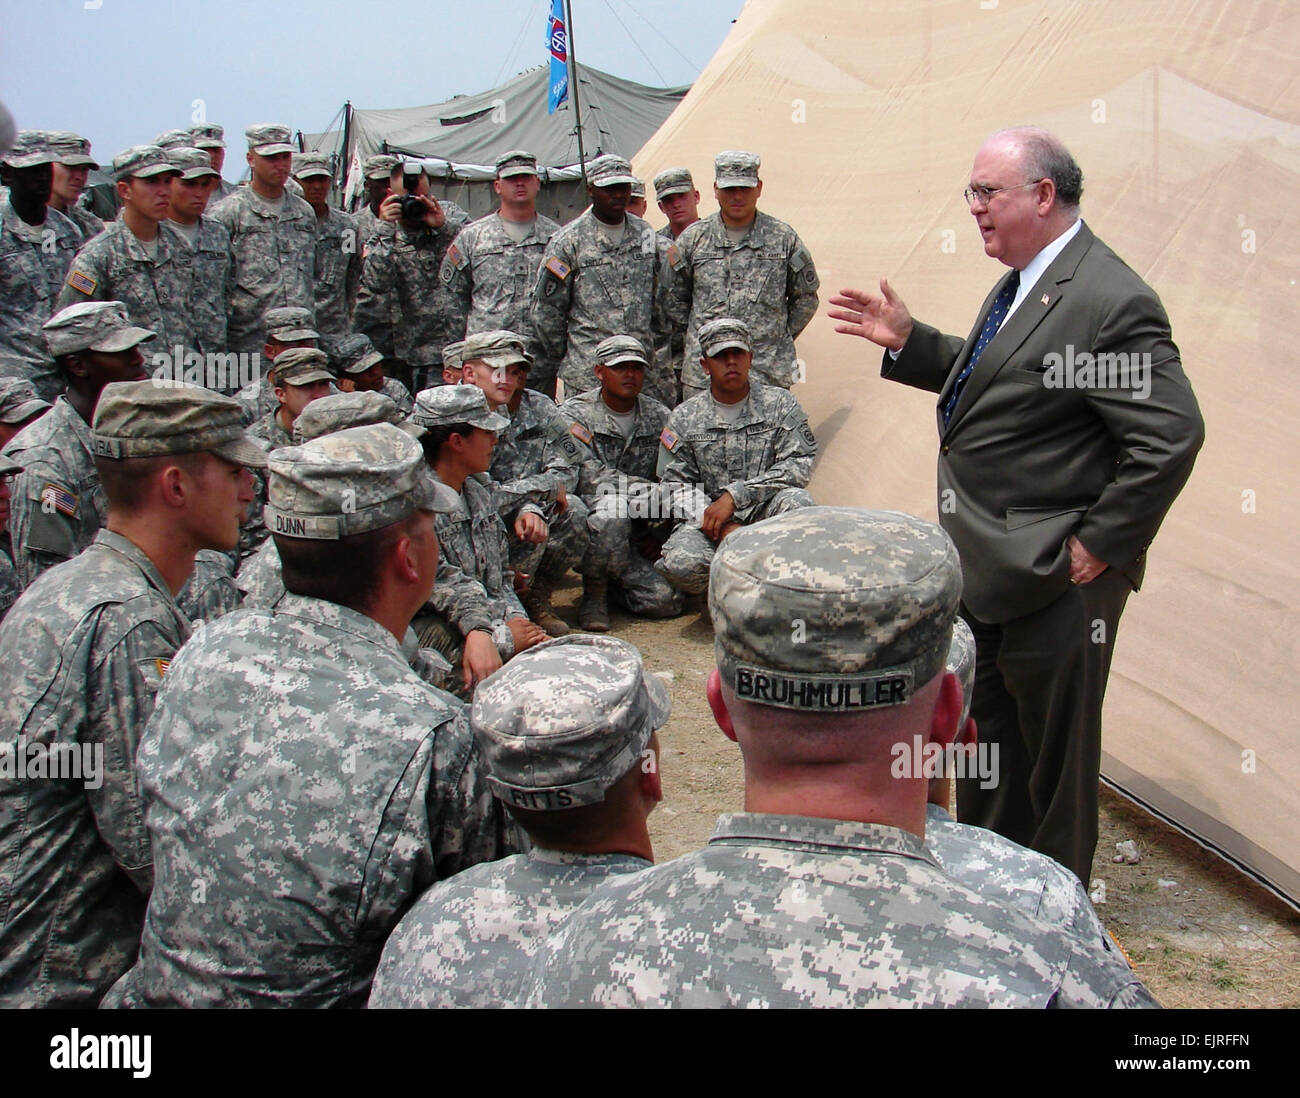 The Honorable Joseph W. Westphal, Under Secretary of the Army, addresses a group of Soldiers from 2nd Brigade, 82nd Airborne Division, in Haiti. The Soldiers are in Haiti providing humanitarian assistance and disaster relief as part of Operation Unified Response. Westphal thanked not only the assembled paratroopers for their service but also their families for their continued support and sacrifice. Stock Photo